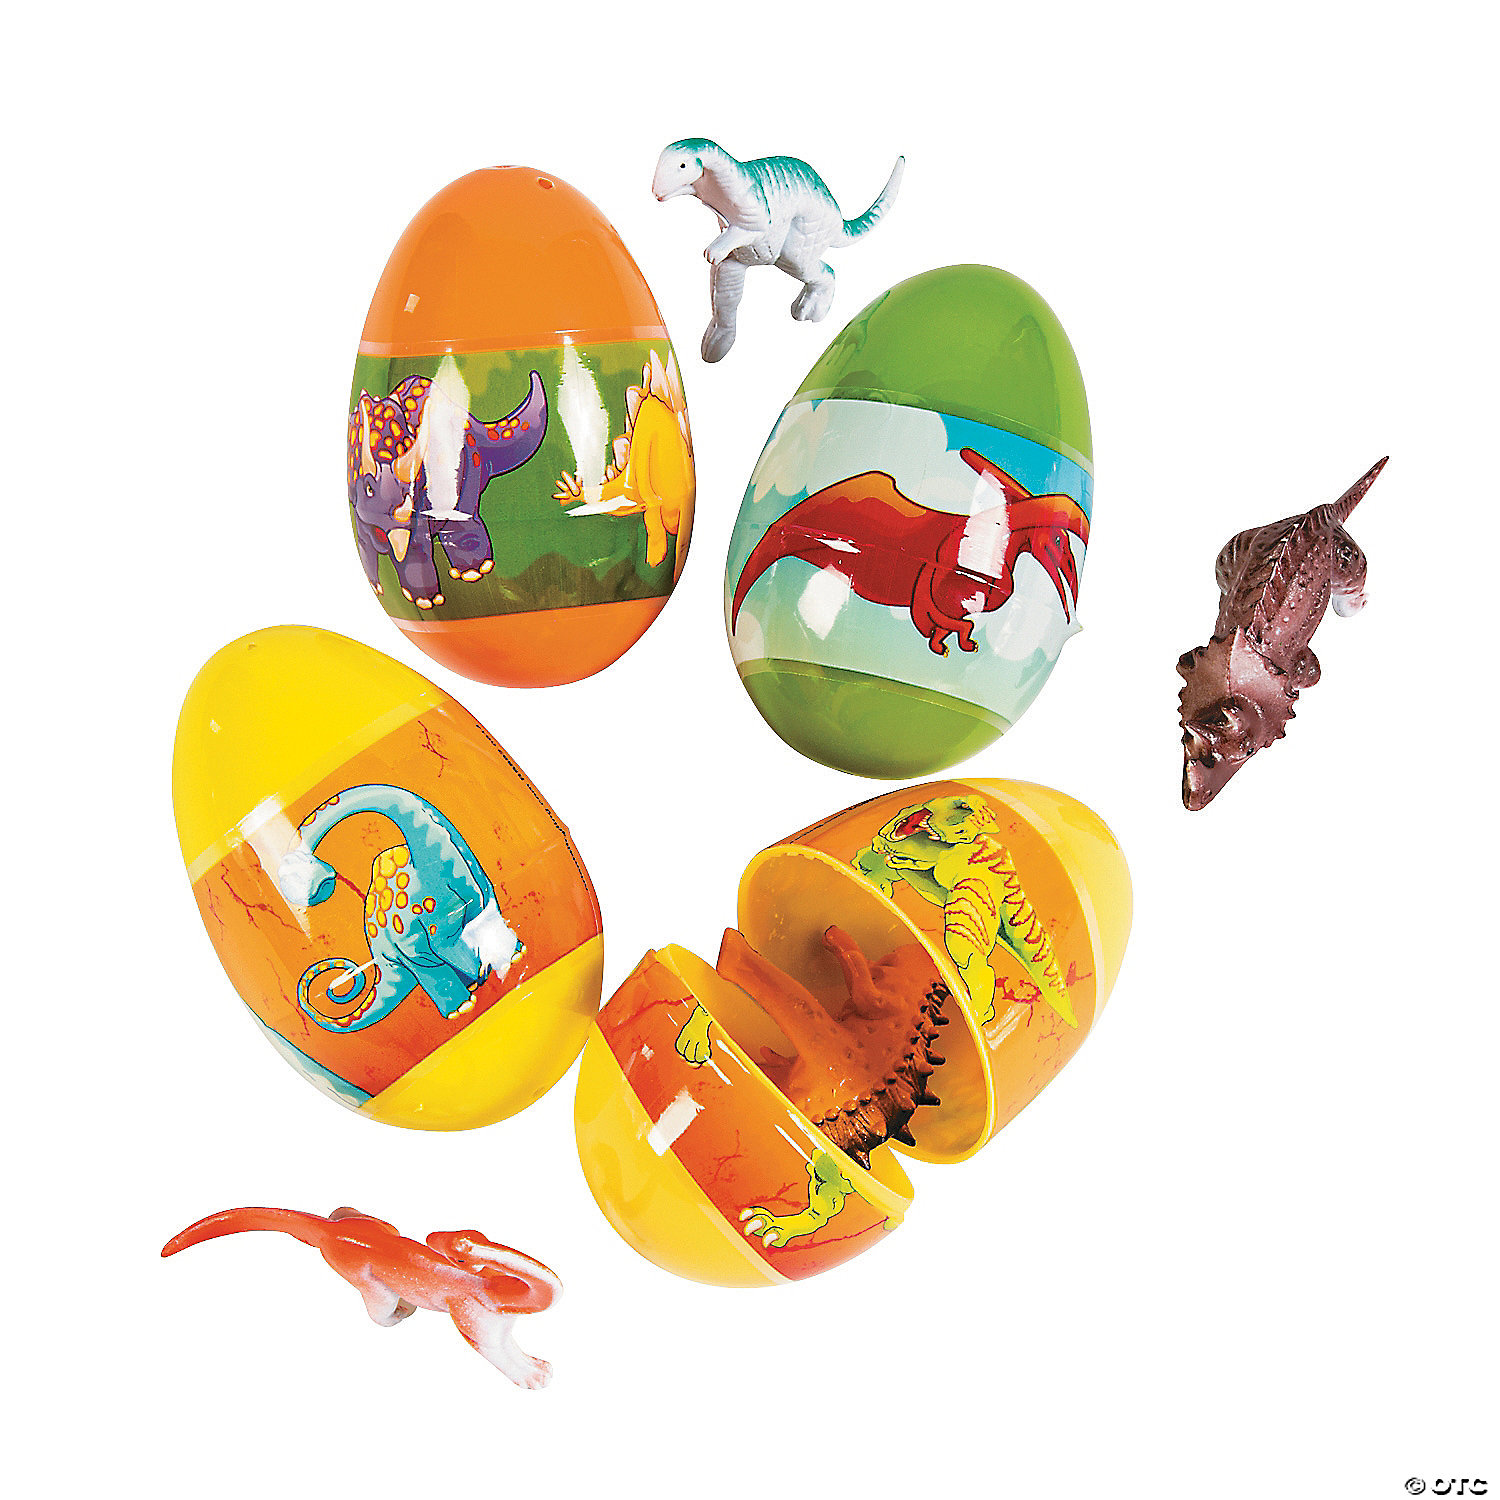 Toy Filled Easter Eggs Filled with Dinosaur Toys Easter Egg Fillers Surprise ...